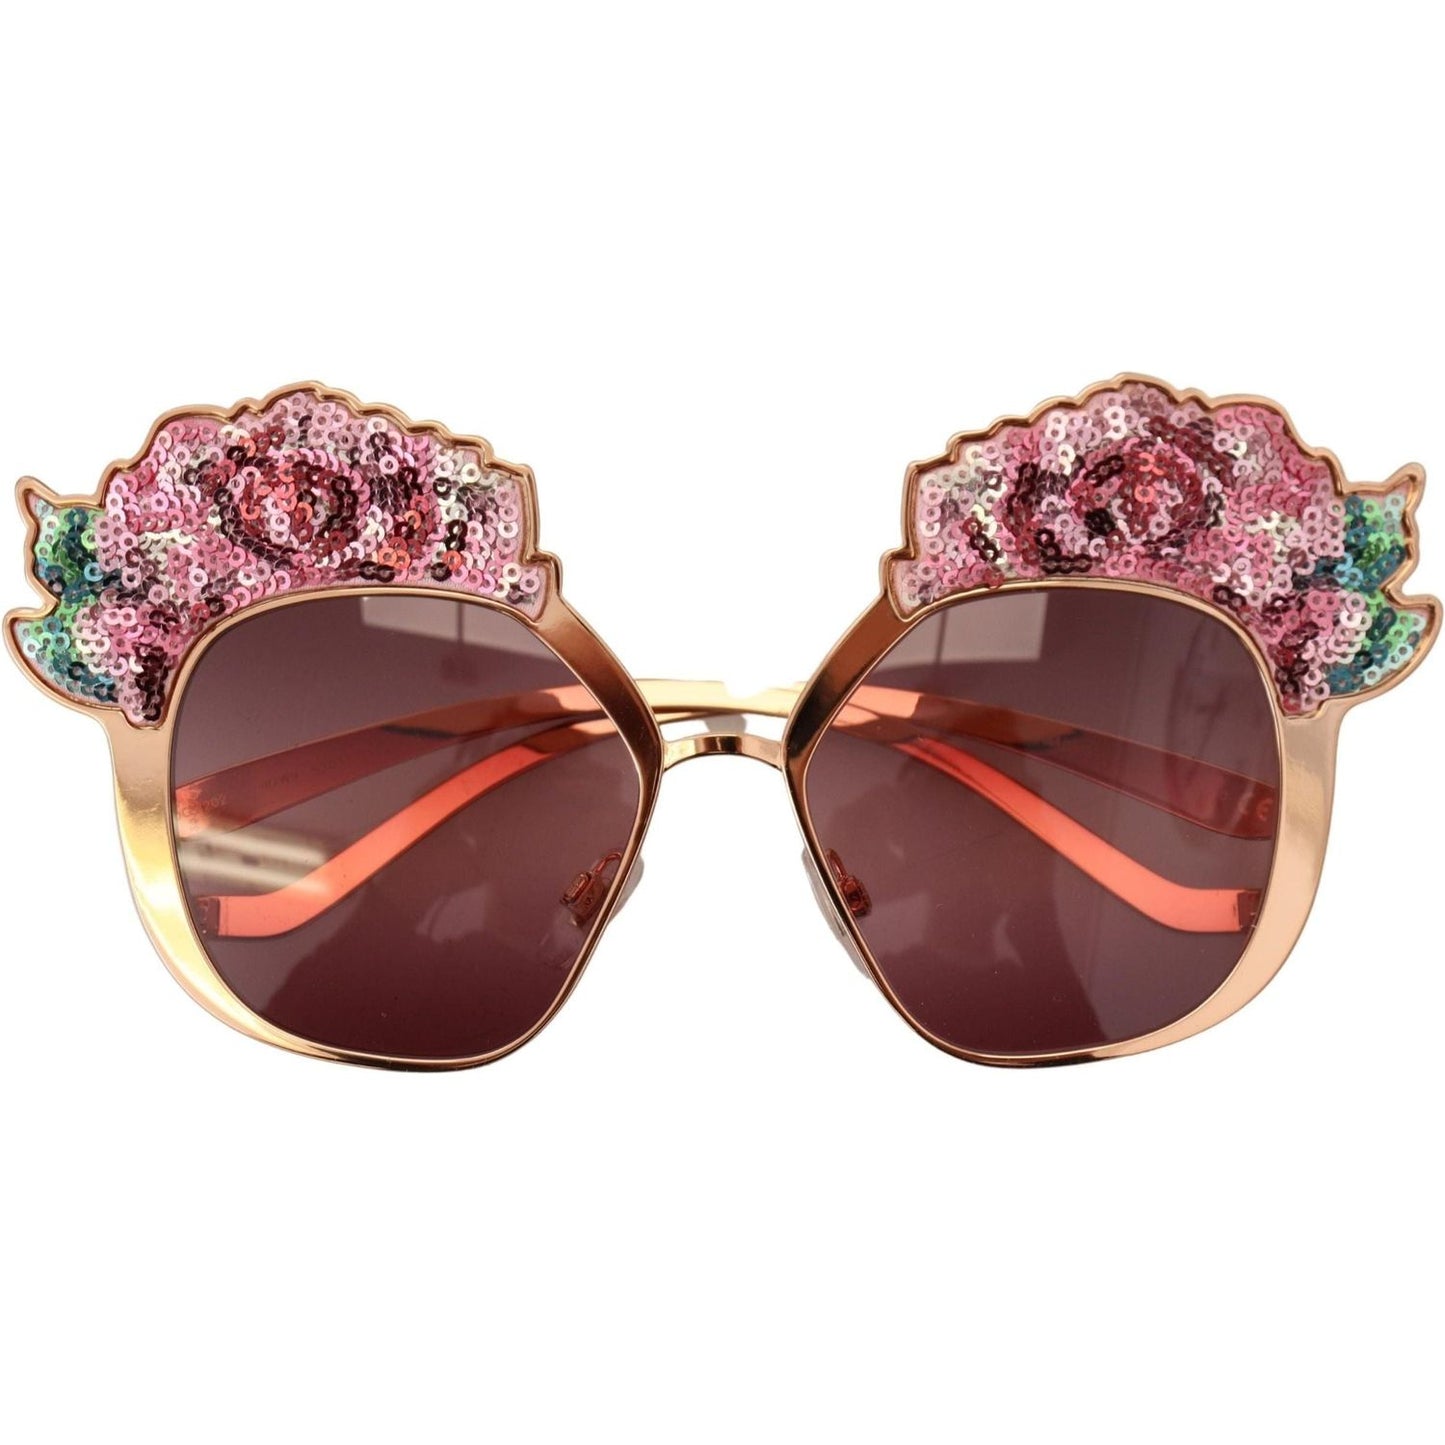 Dolce & Gabbana Chic Rose Sequin Embroidered Sunglasses pink-gold-rose-sequin-embroidery-dg2202-sunglasses IMG_5699-1-scaled-a97afbe2-669.jpg